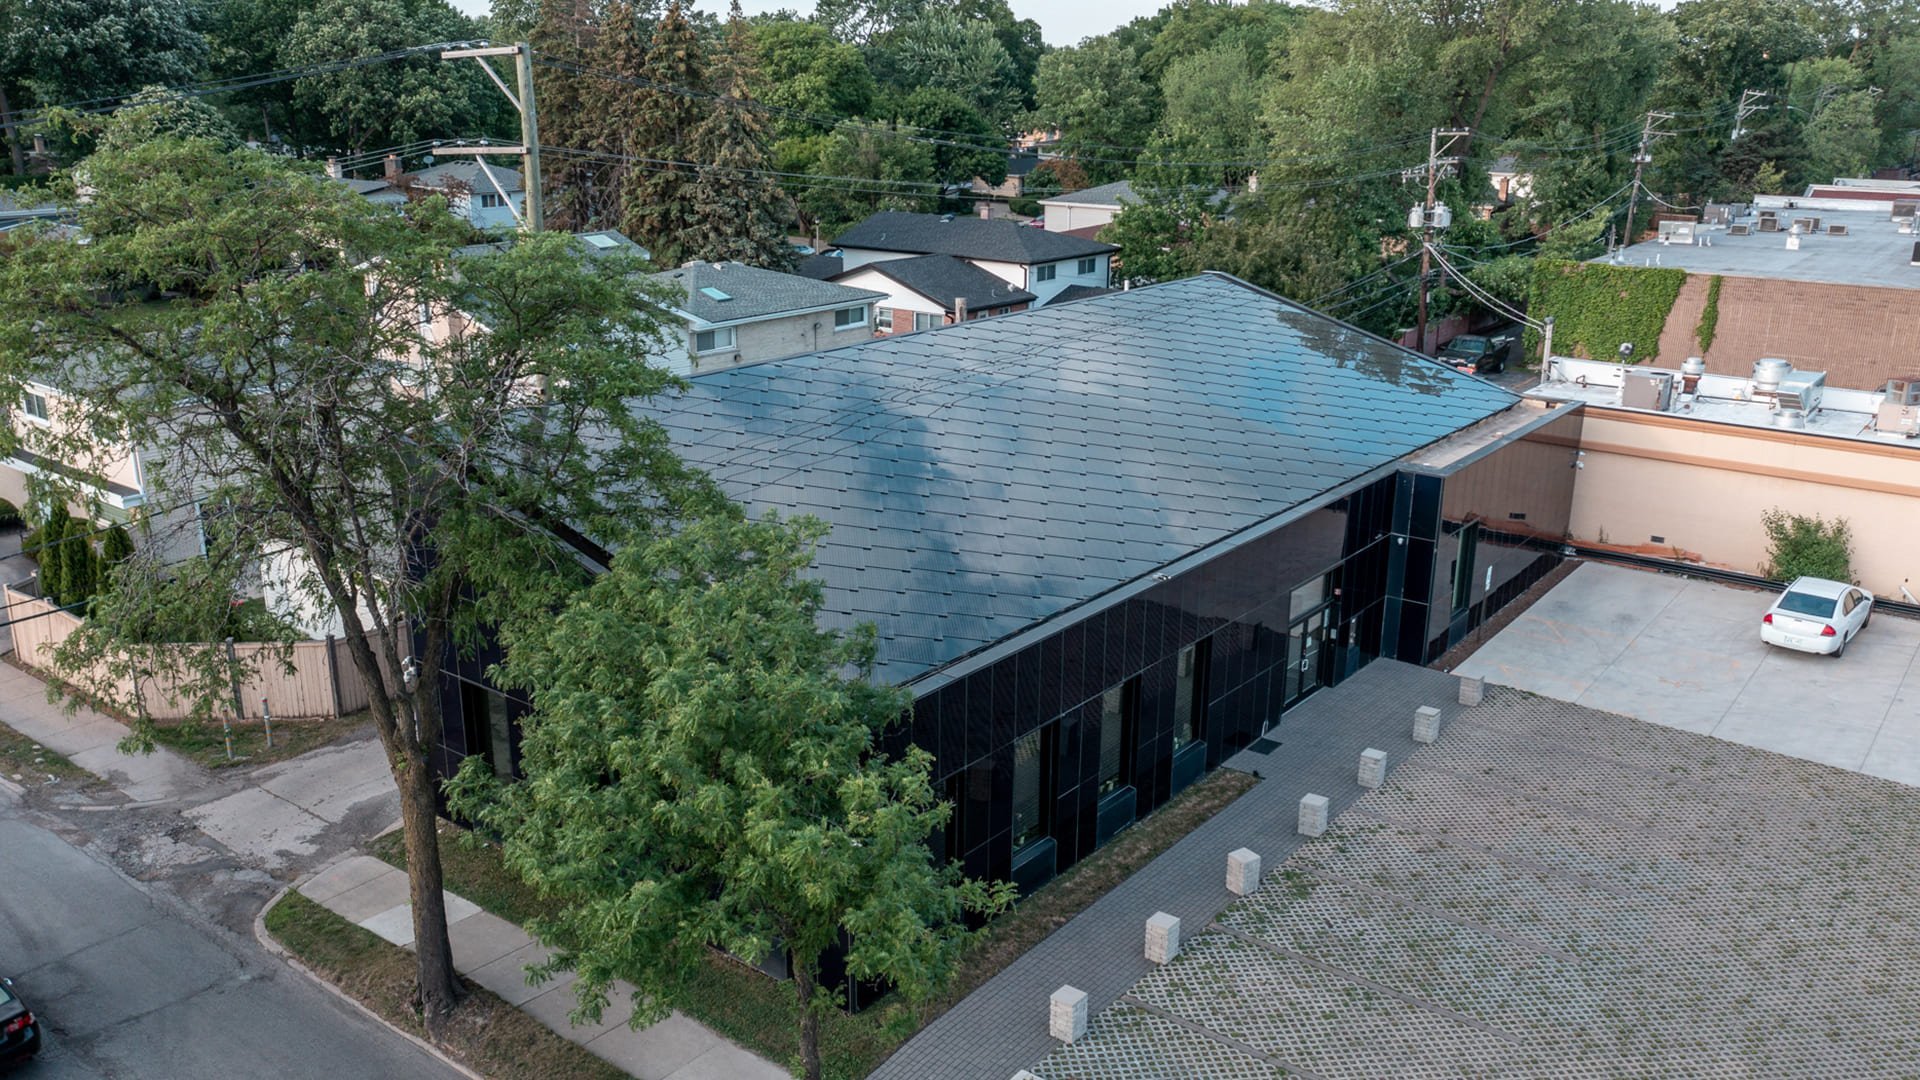 SunStyle solar tiles on a sustainable commercial bank in Skokie, Illinois USA which generates enough electricity to power the bank